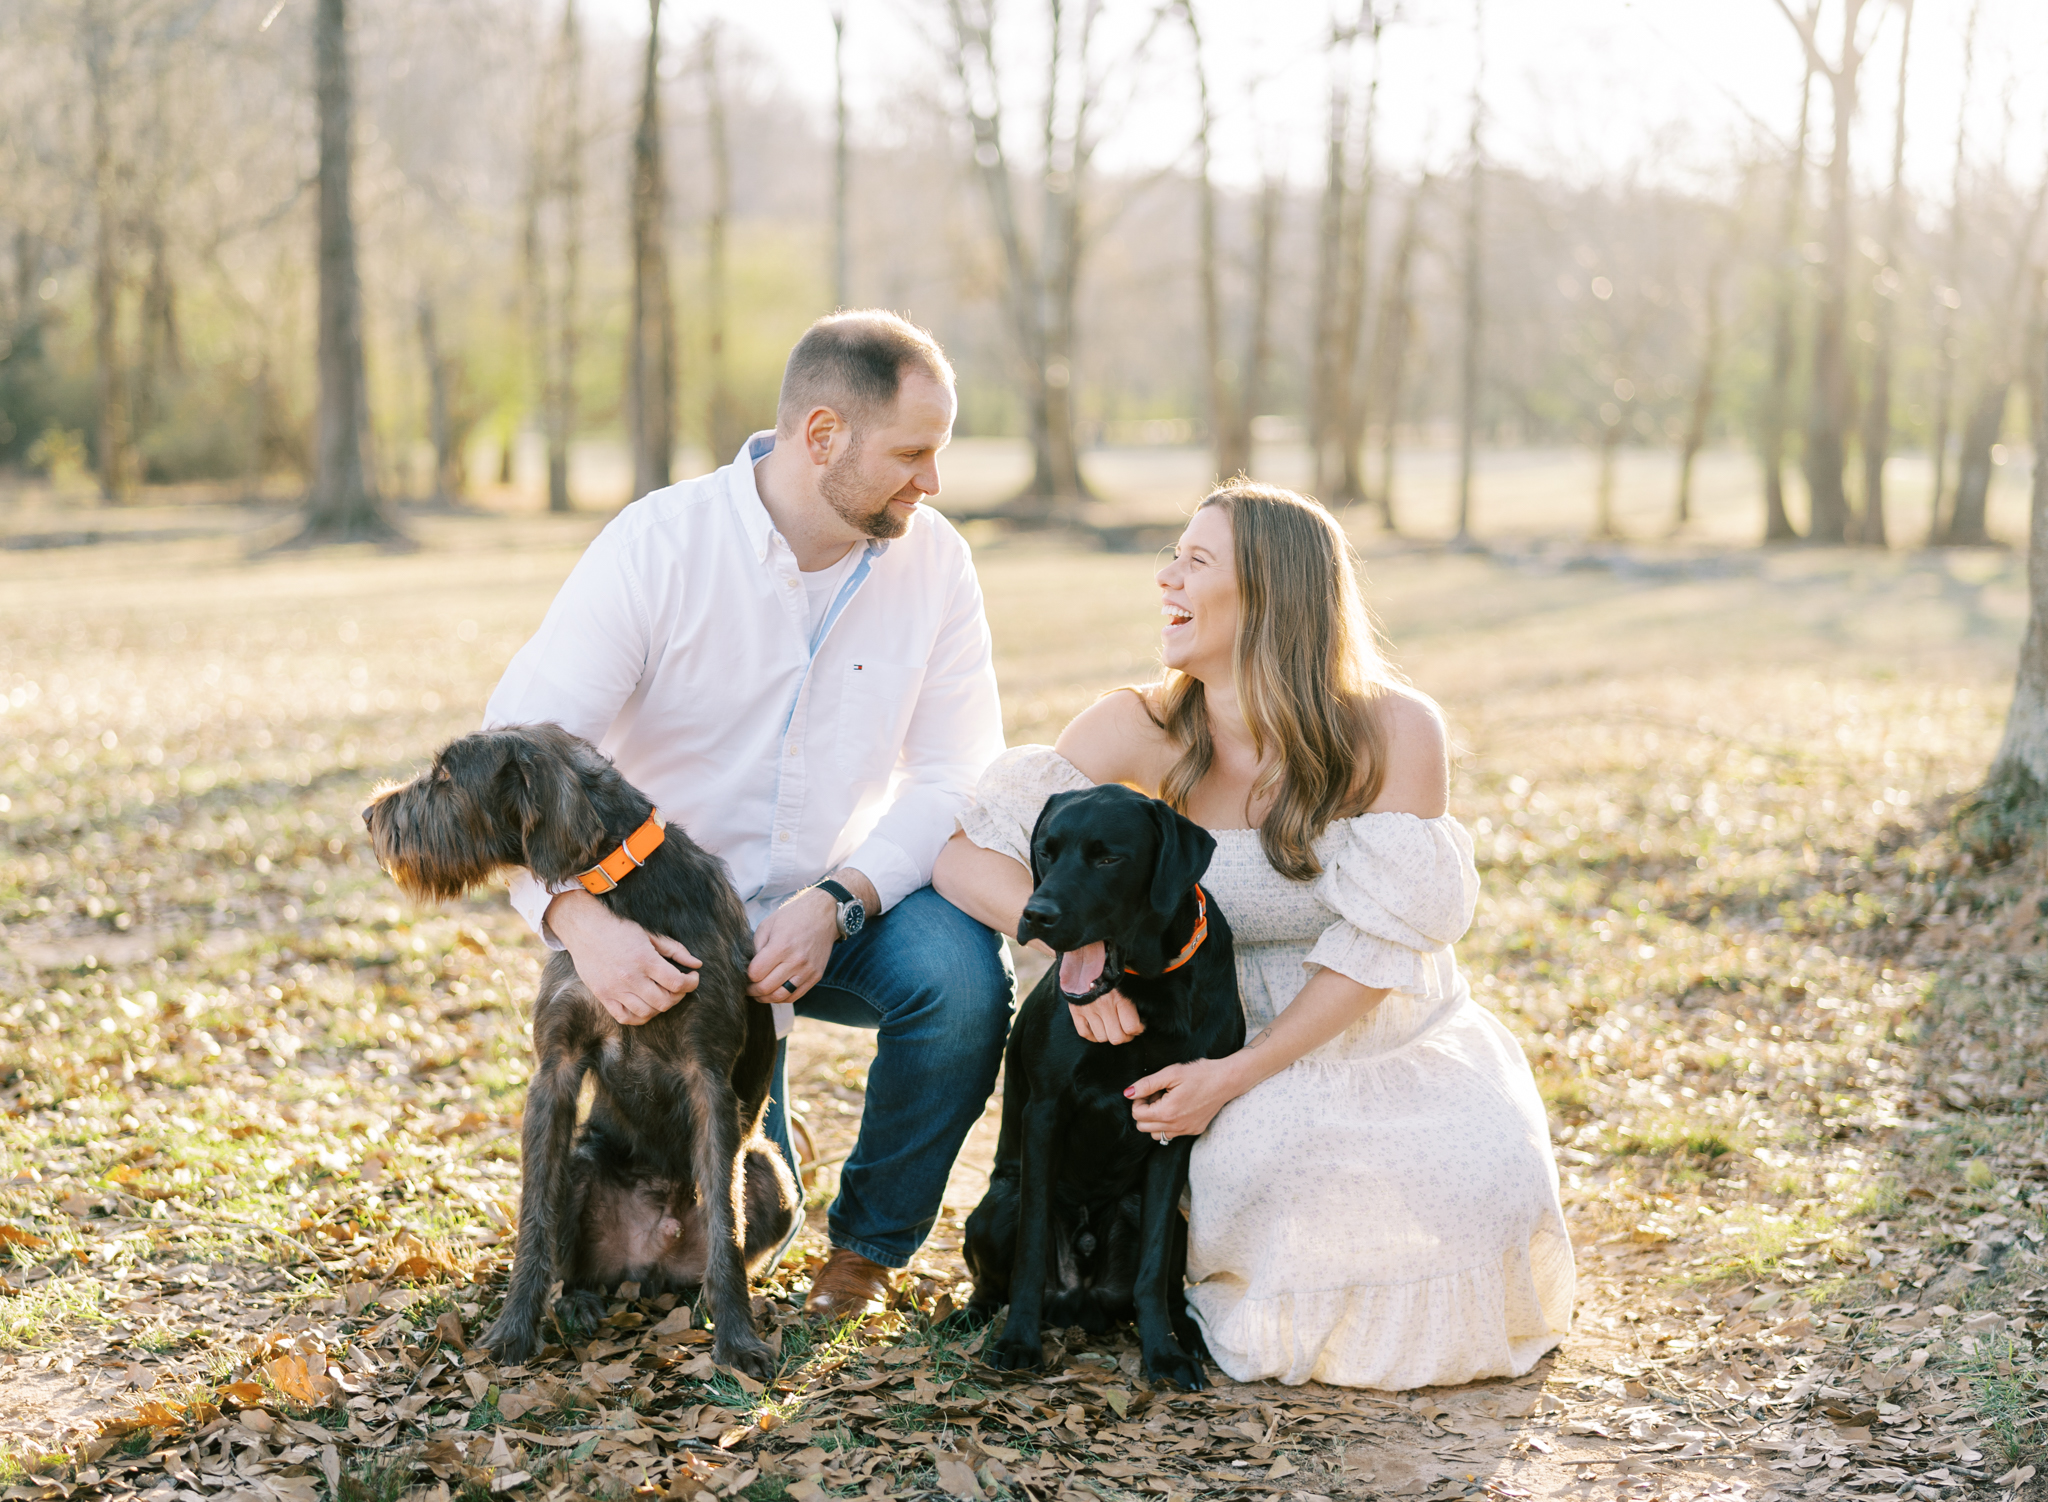 sunset maternity photos with dogs in a field in Cumming GA